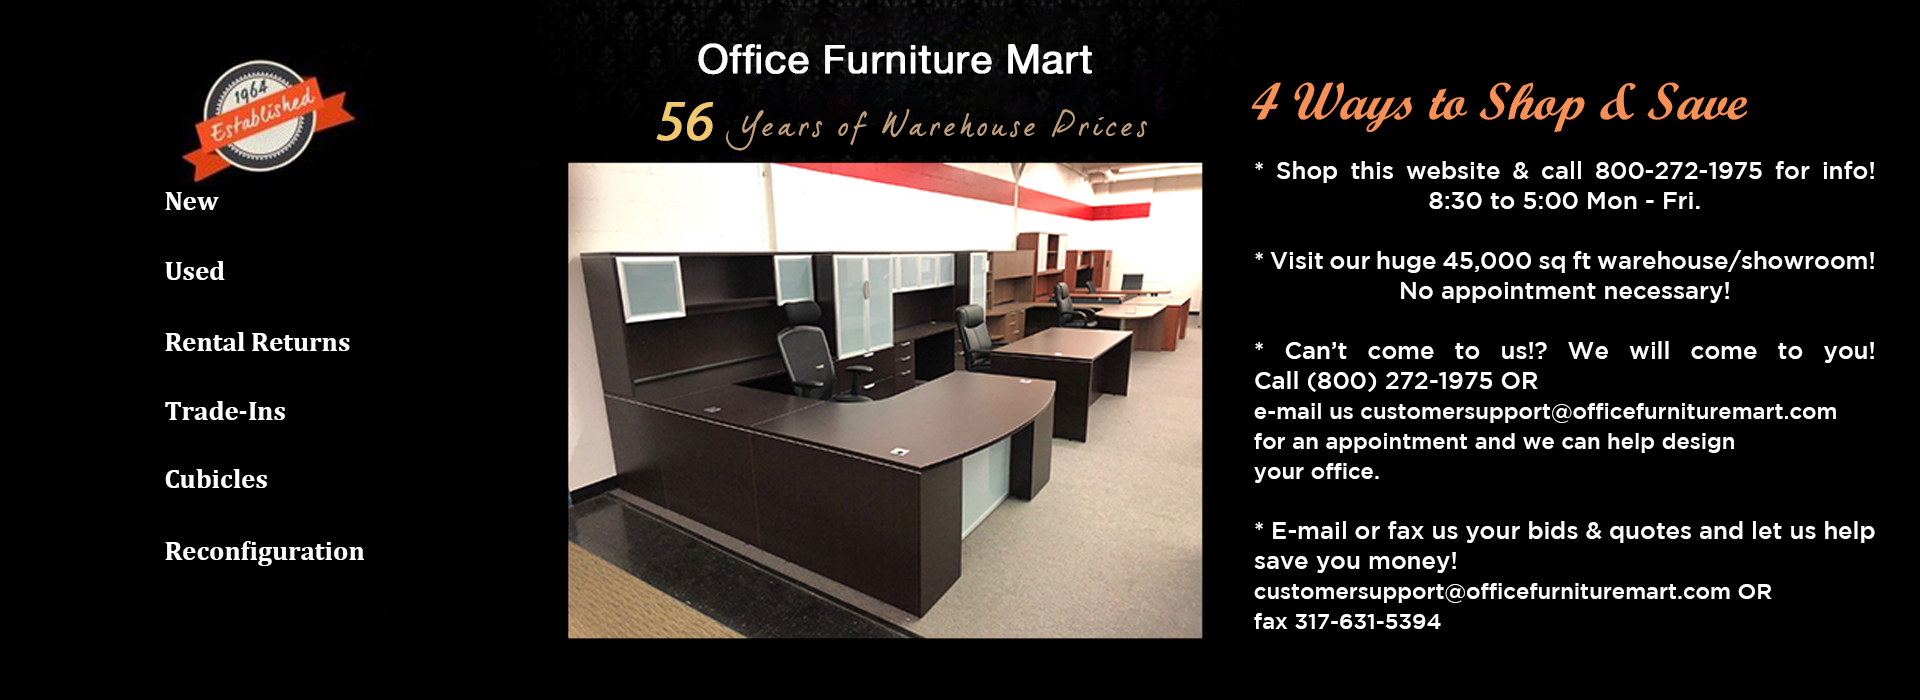 New Used Office Furniture Office Chairs Conference Tables Desks